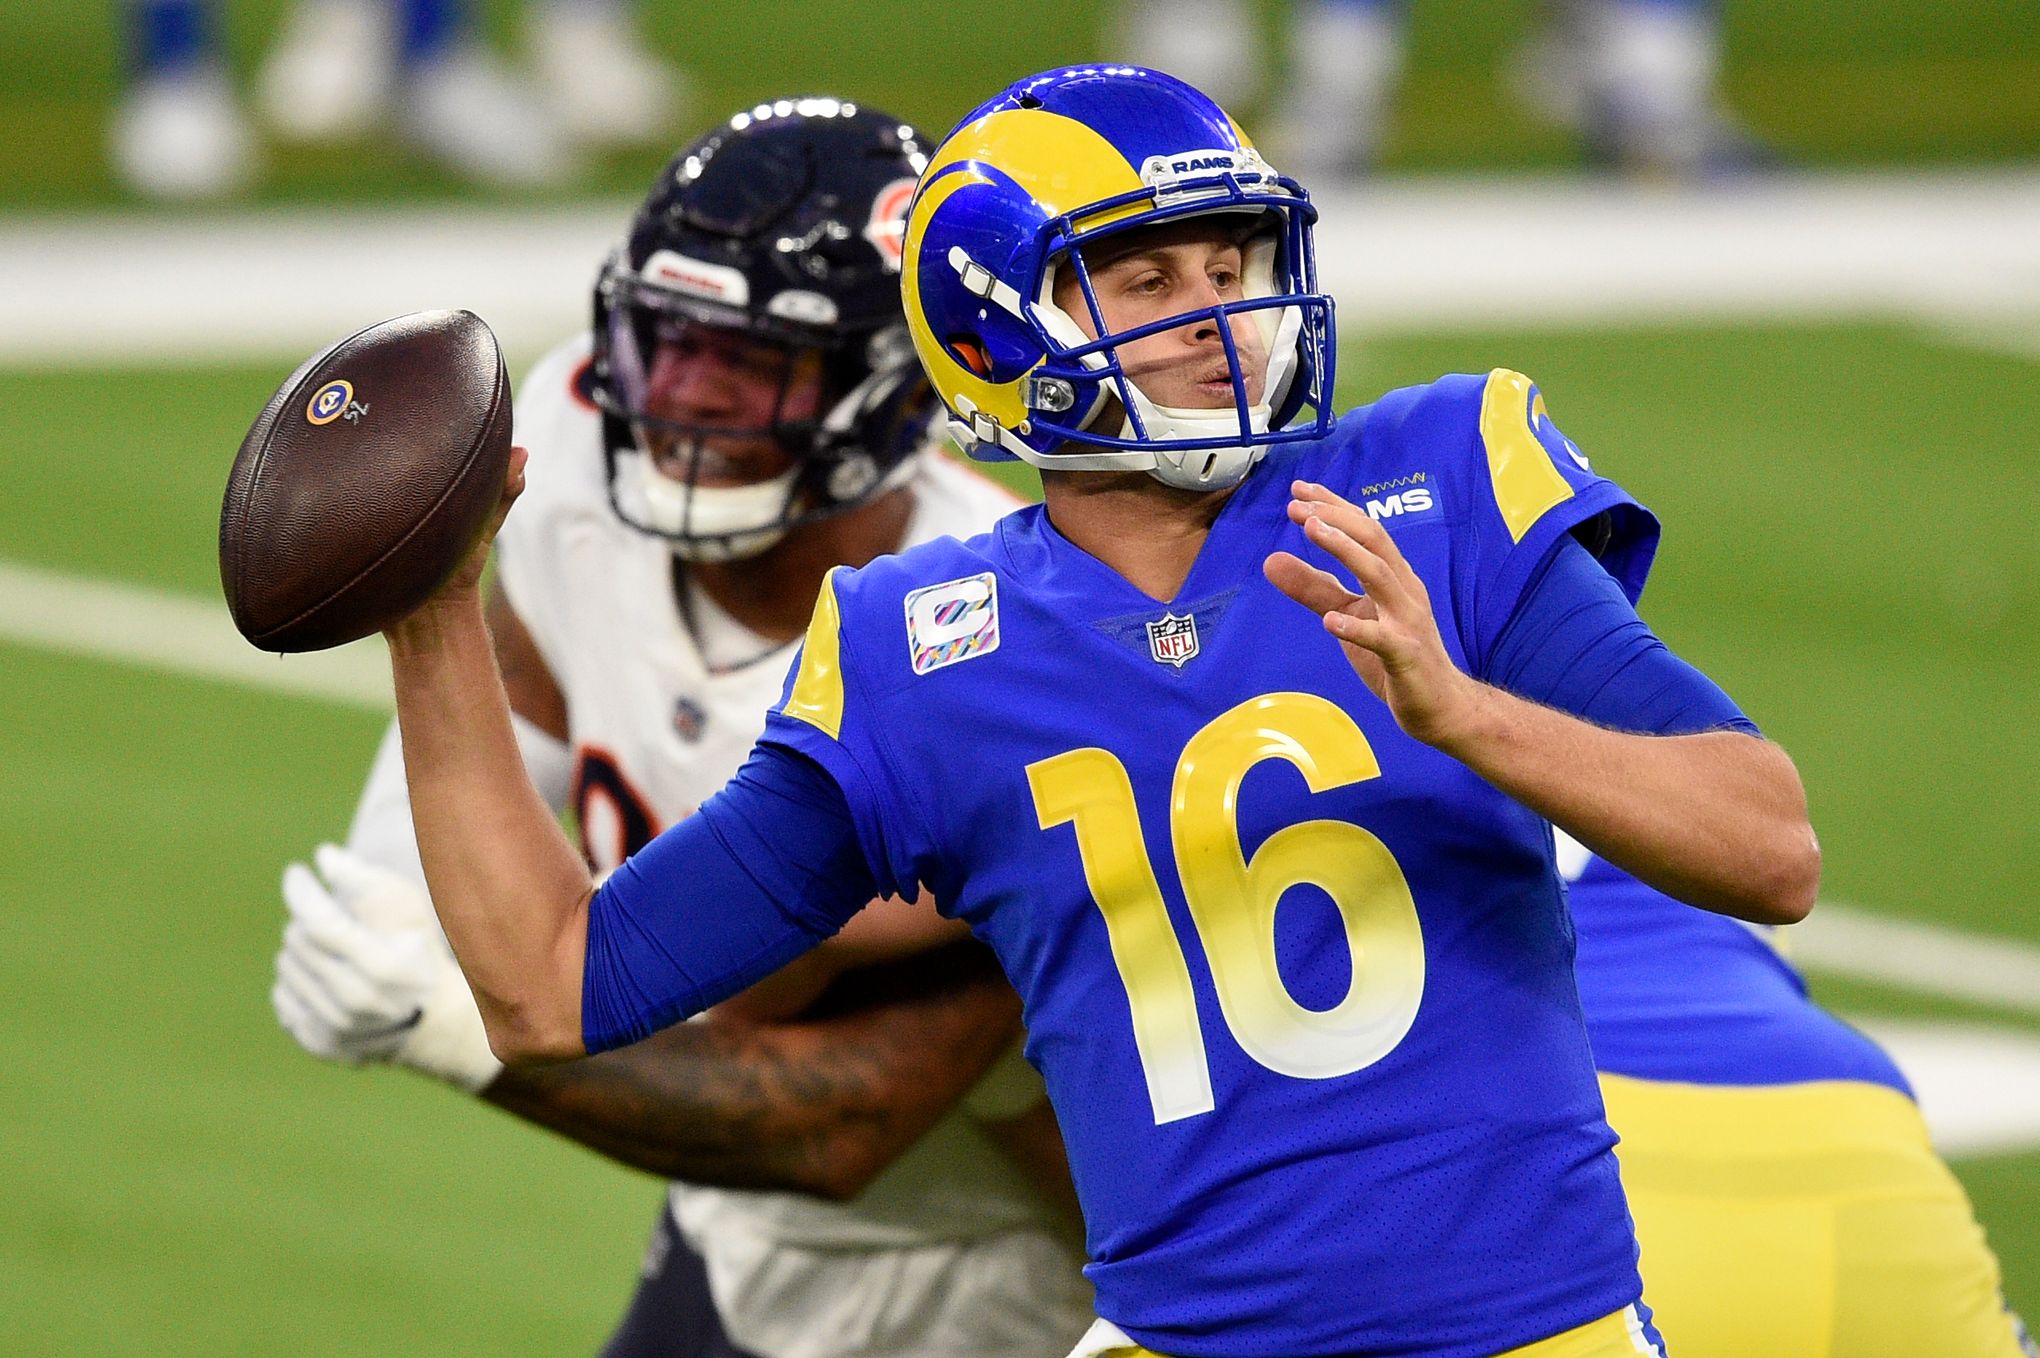 Rams release new uniforms, recalling their L.A. roots - Los